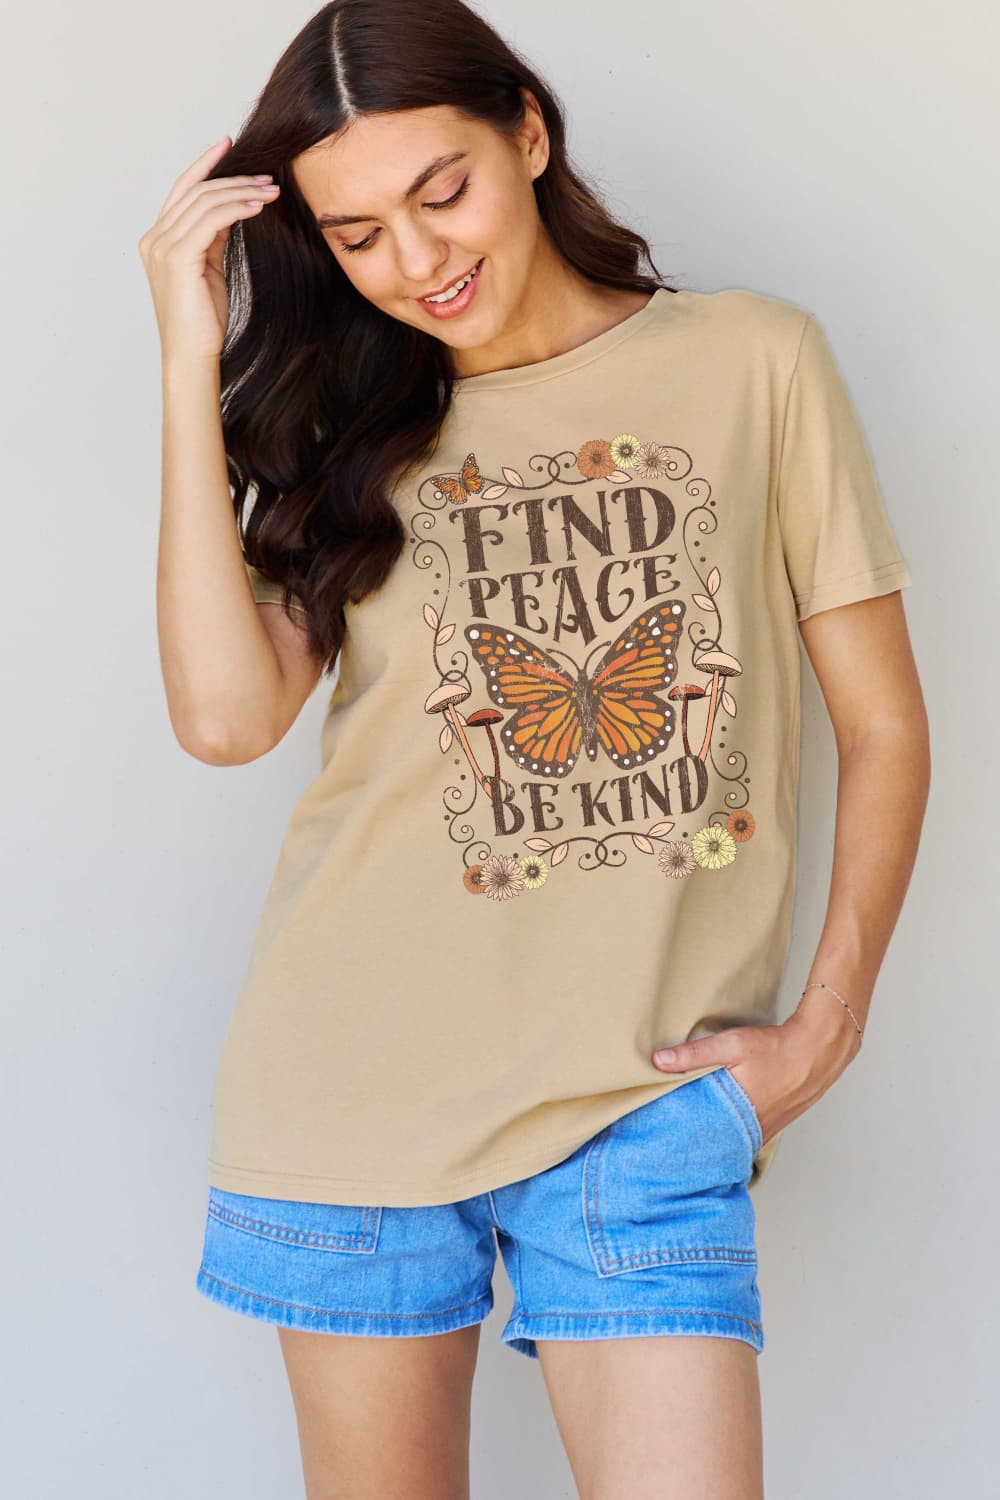 Simply Love FIND PEACE BE KIND Graphic Cotton T-Shirt